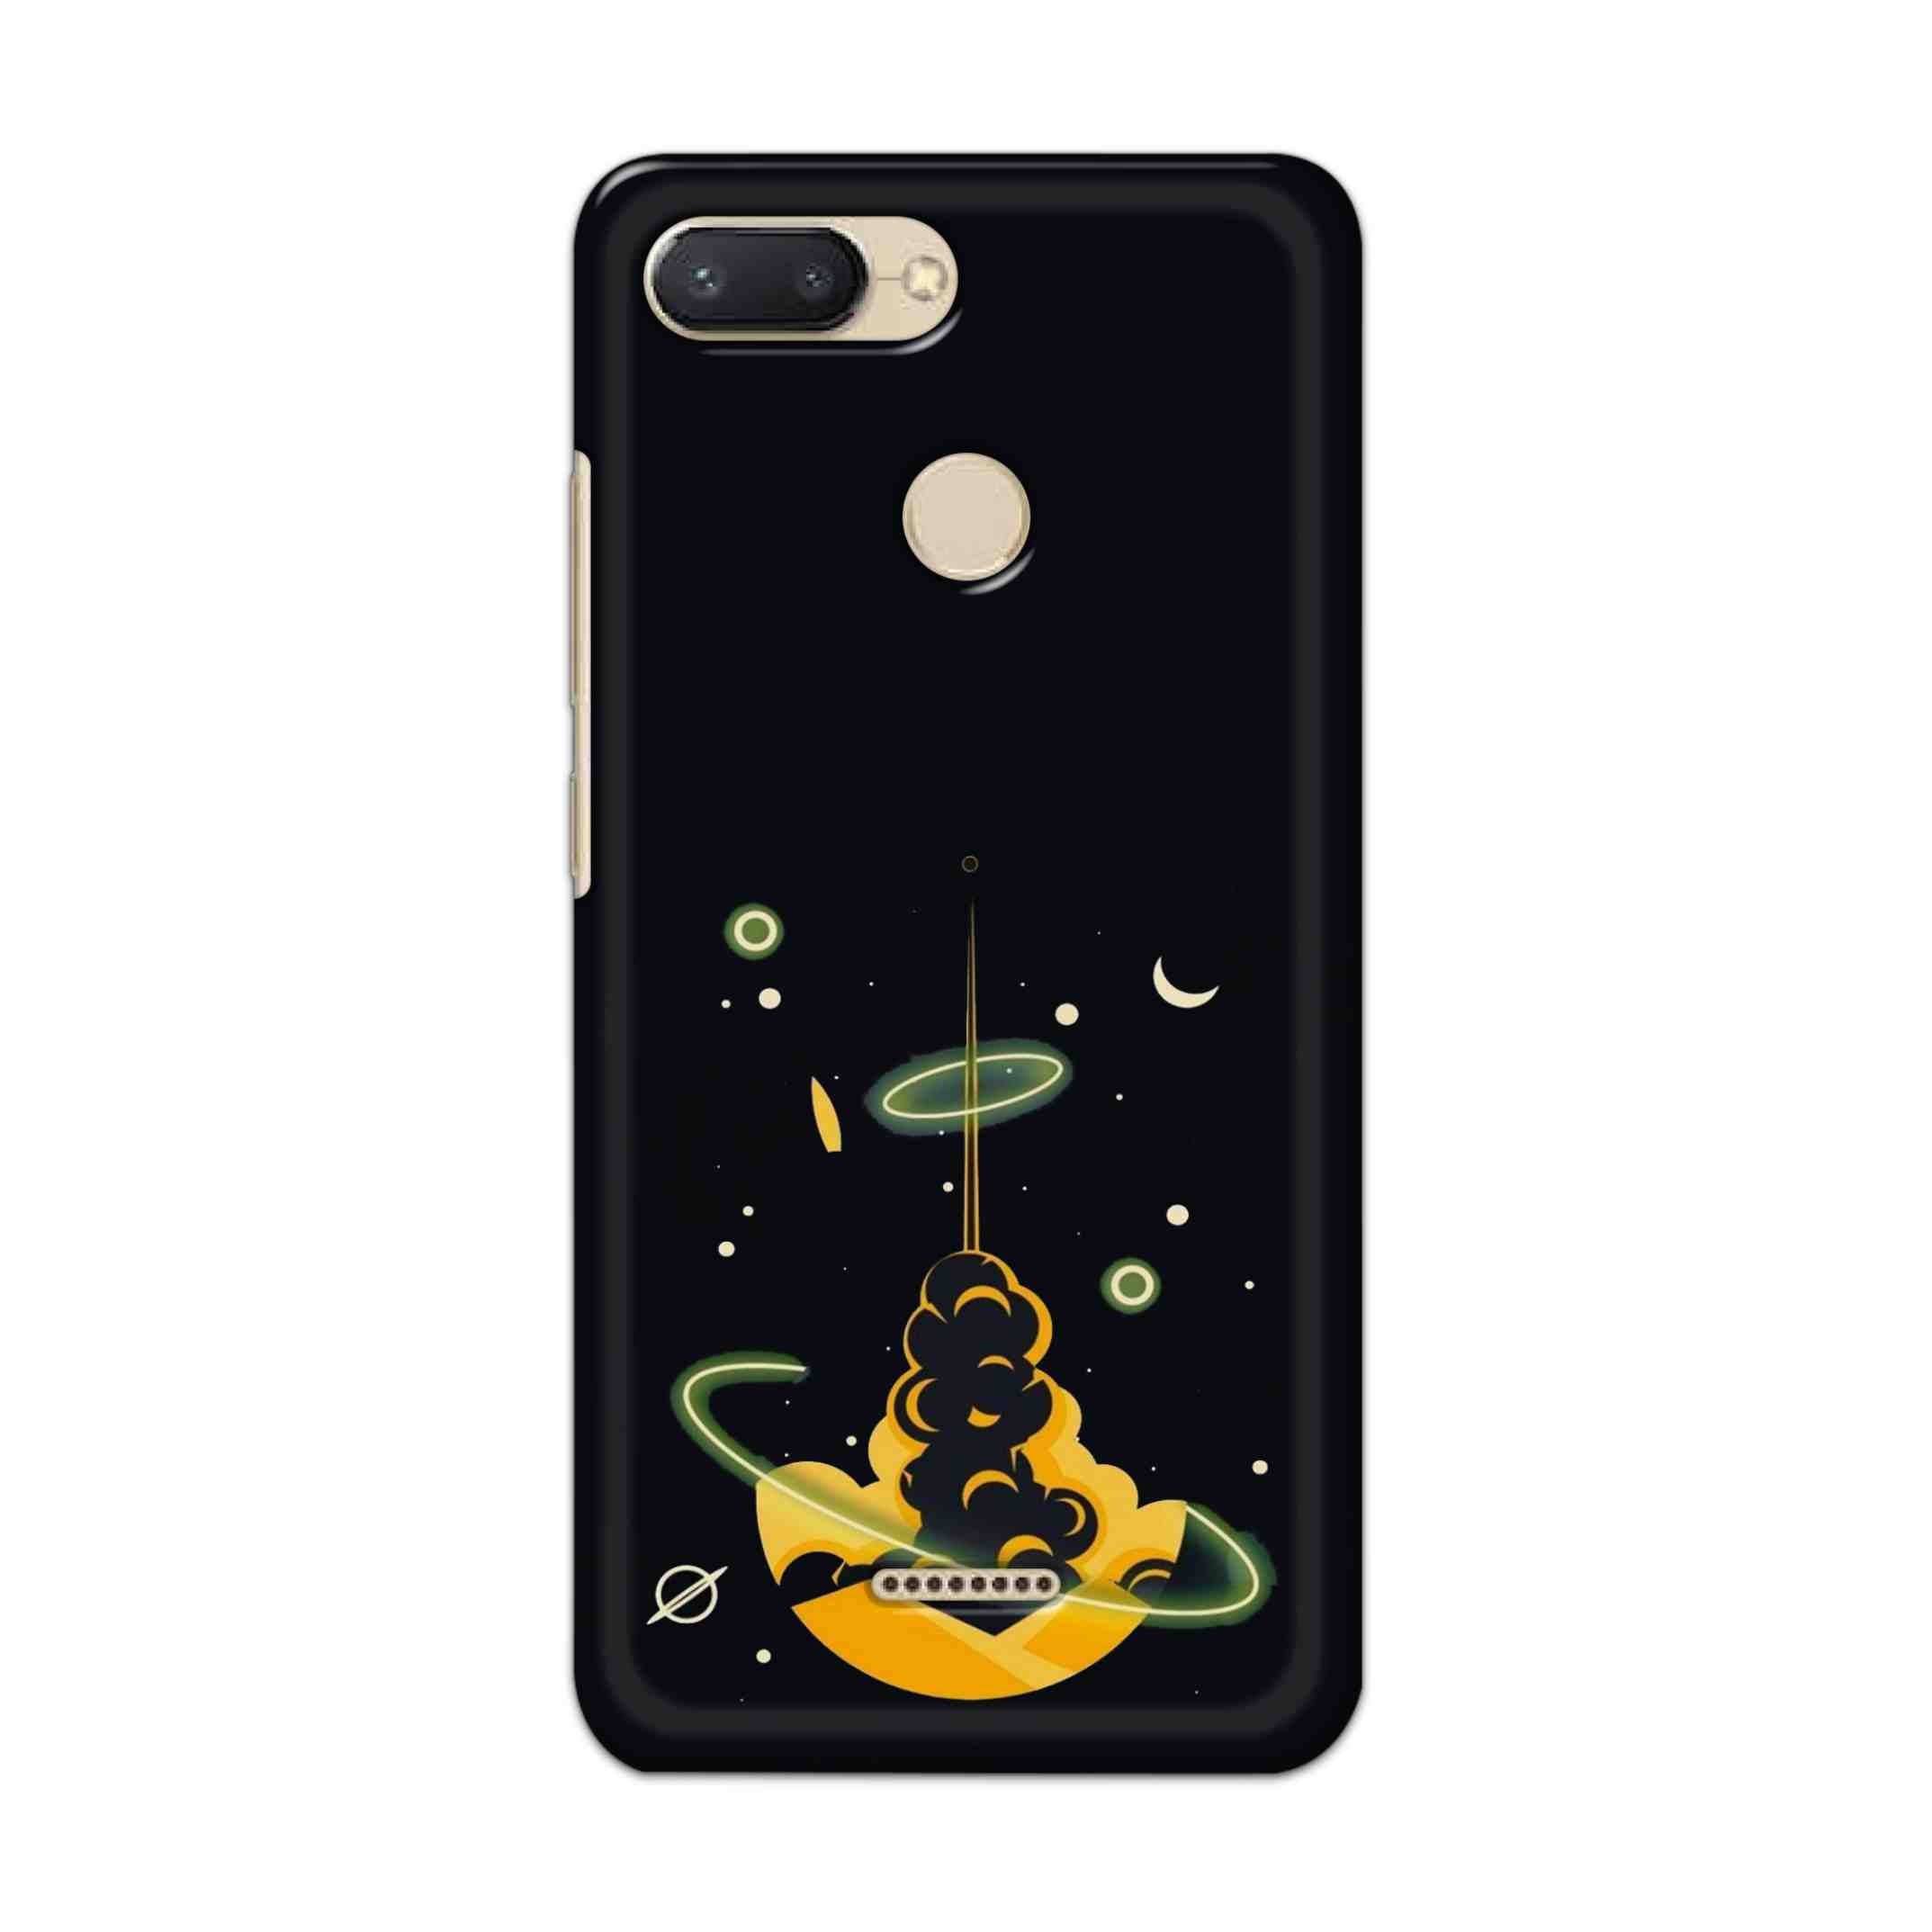 Buy Moon Hard Back Mobile Phone Case/Cover For Xiaomi Redmi 6 Online